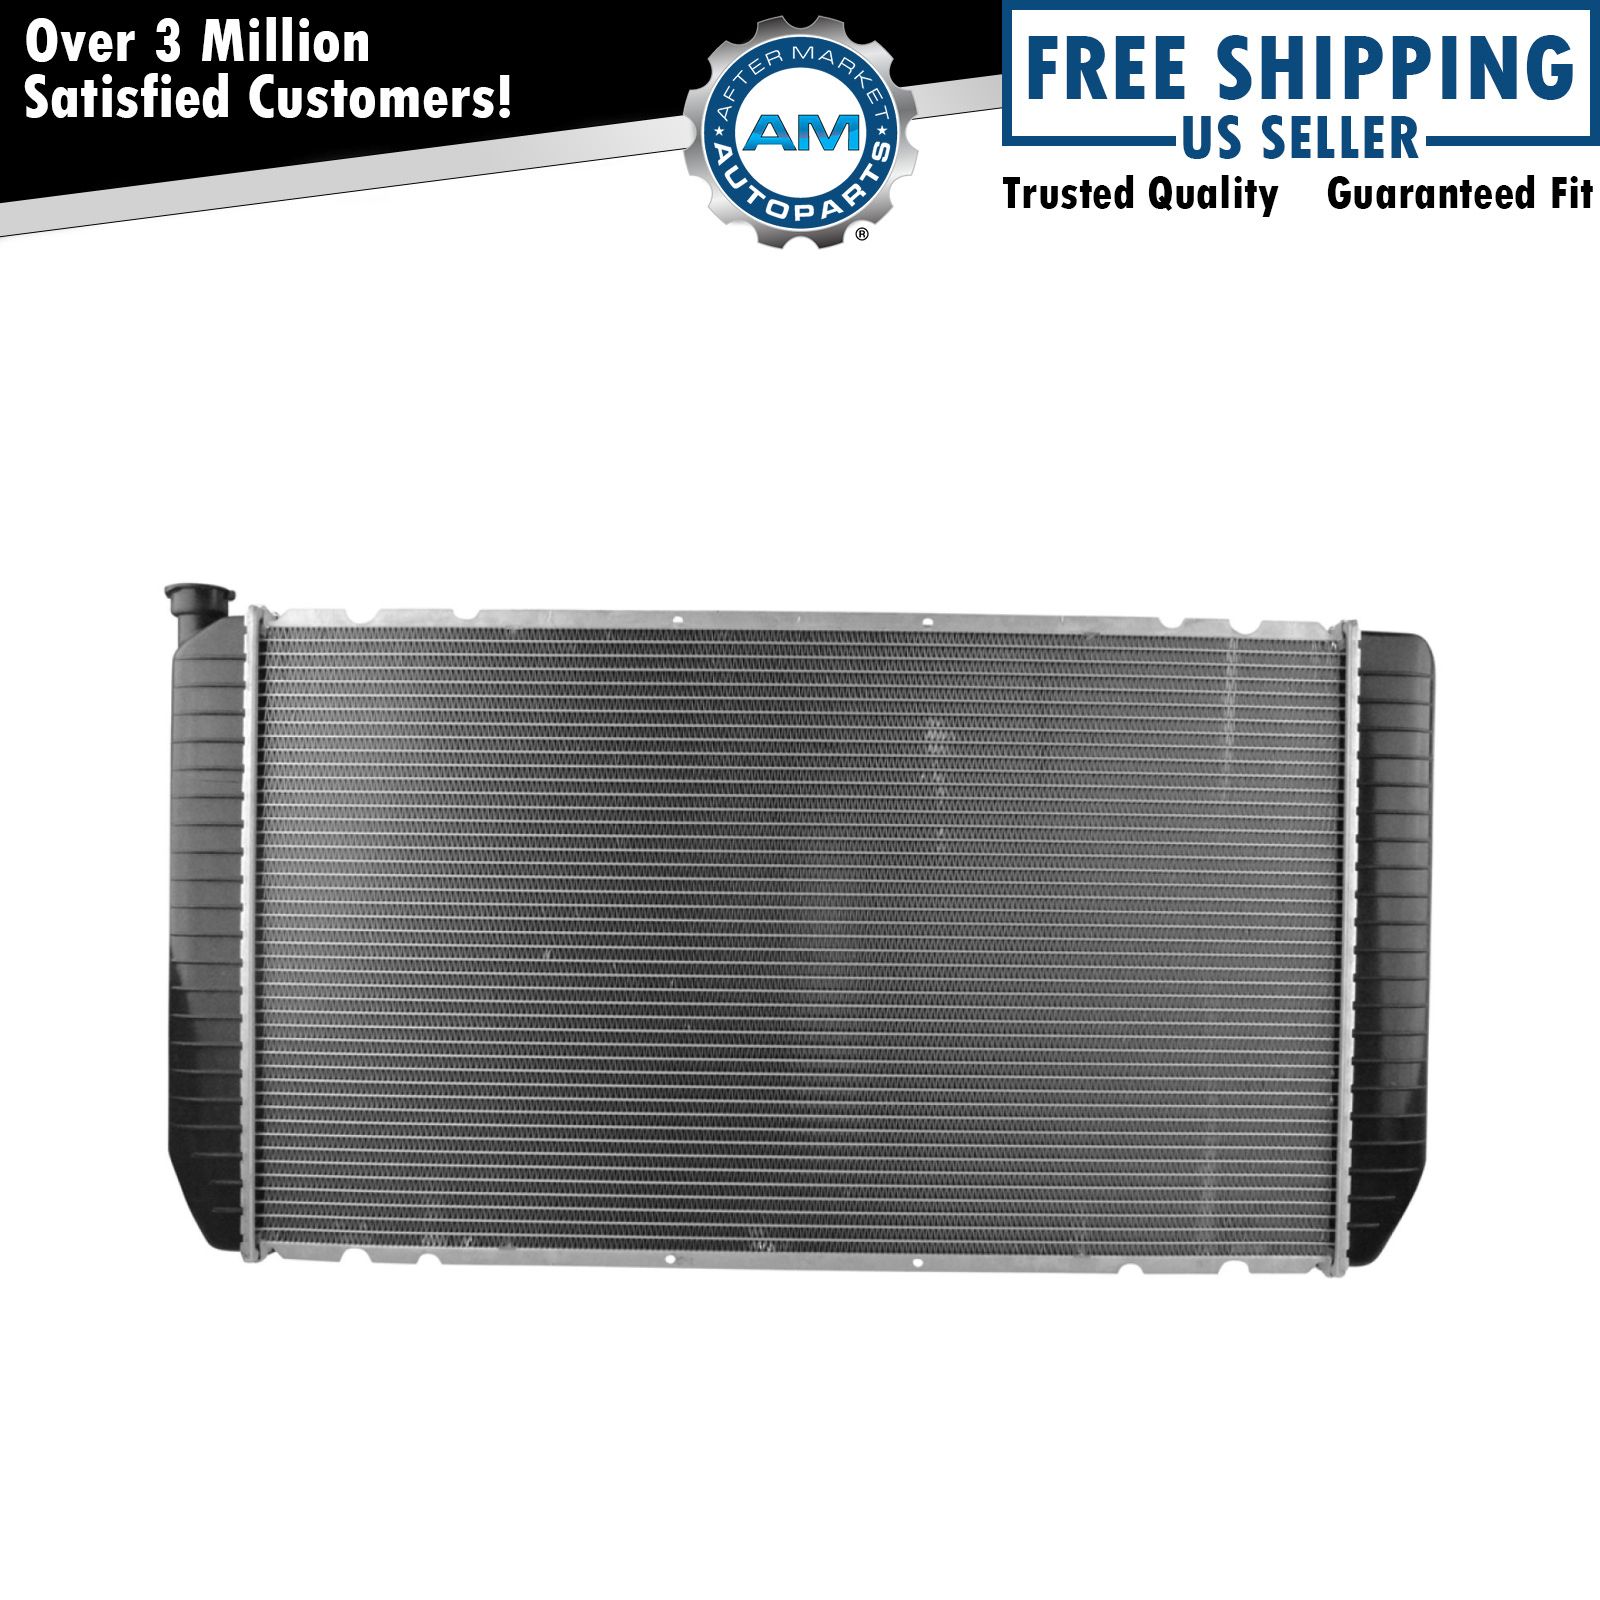 Radiator Assembly Aluminum Core Direct Fit for Chevy GMC Pickup Truck SUV New